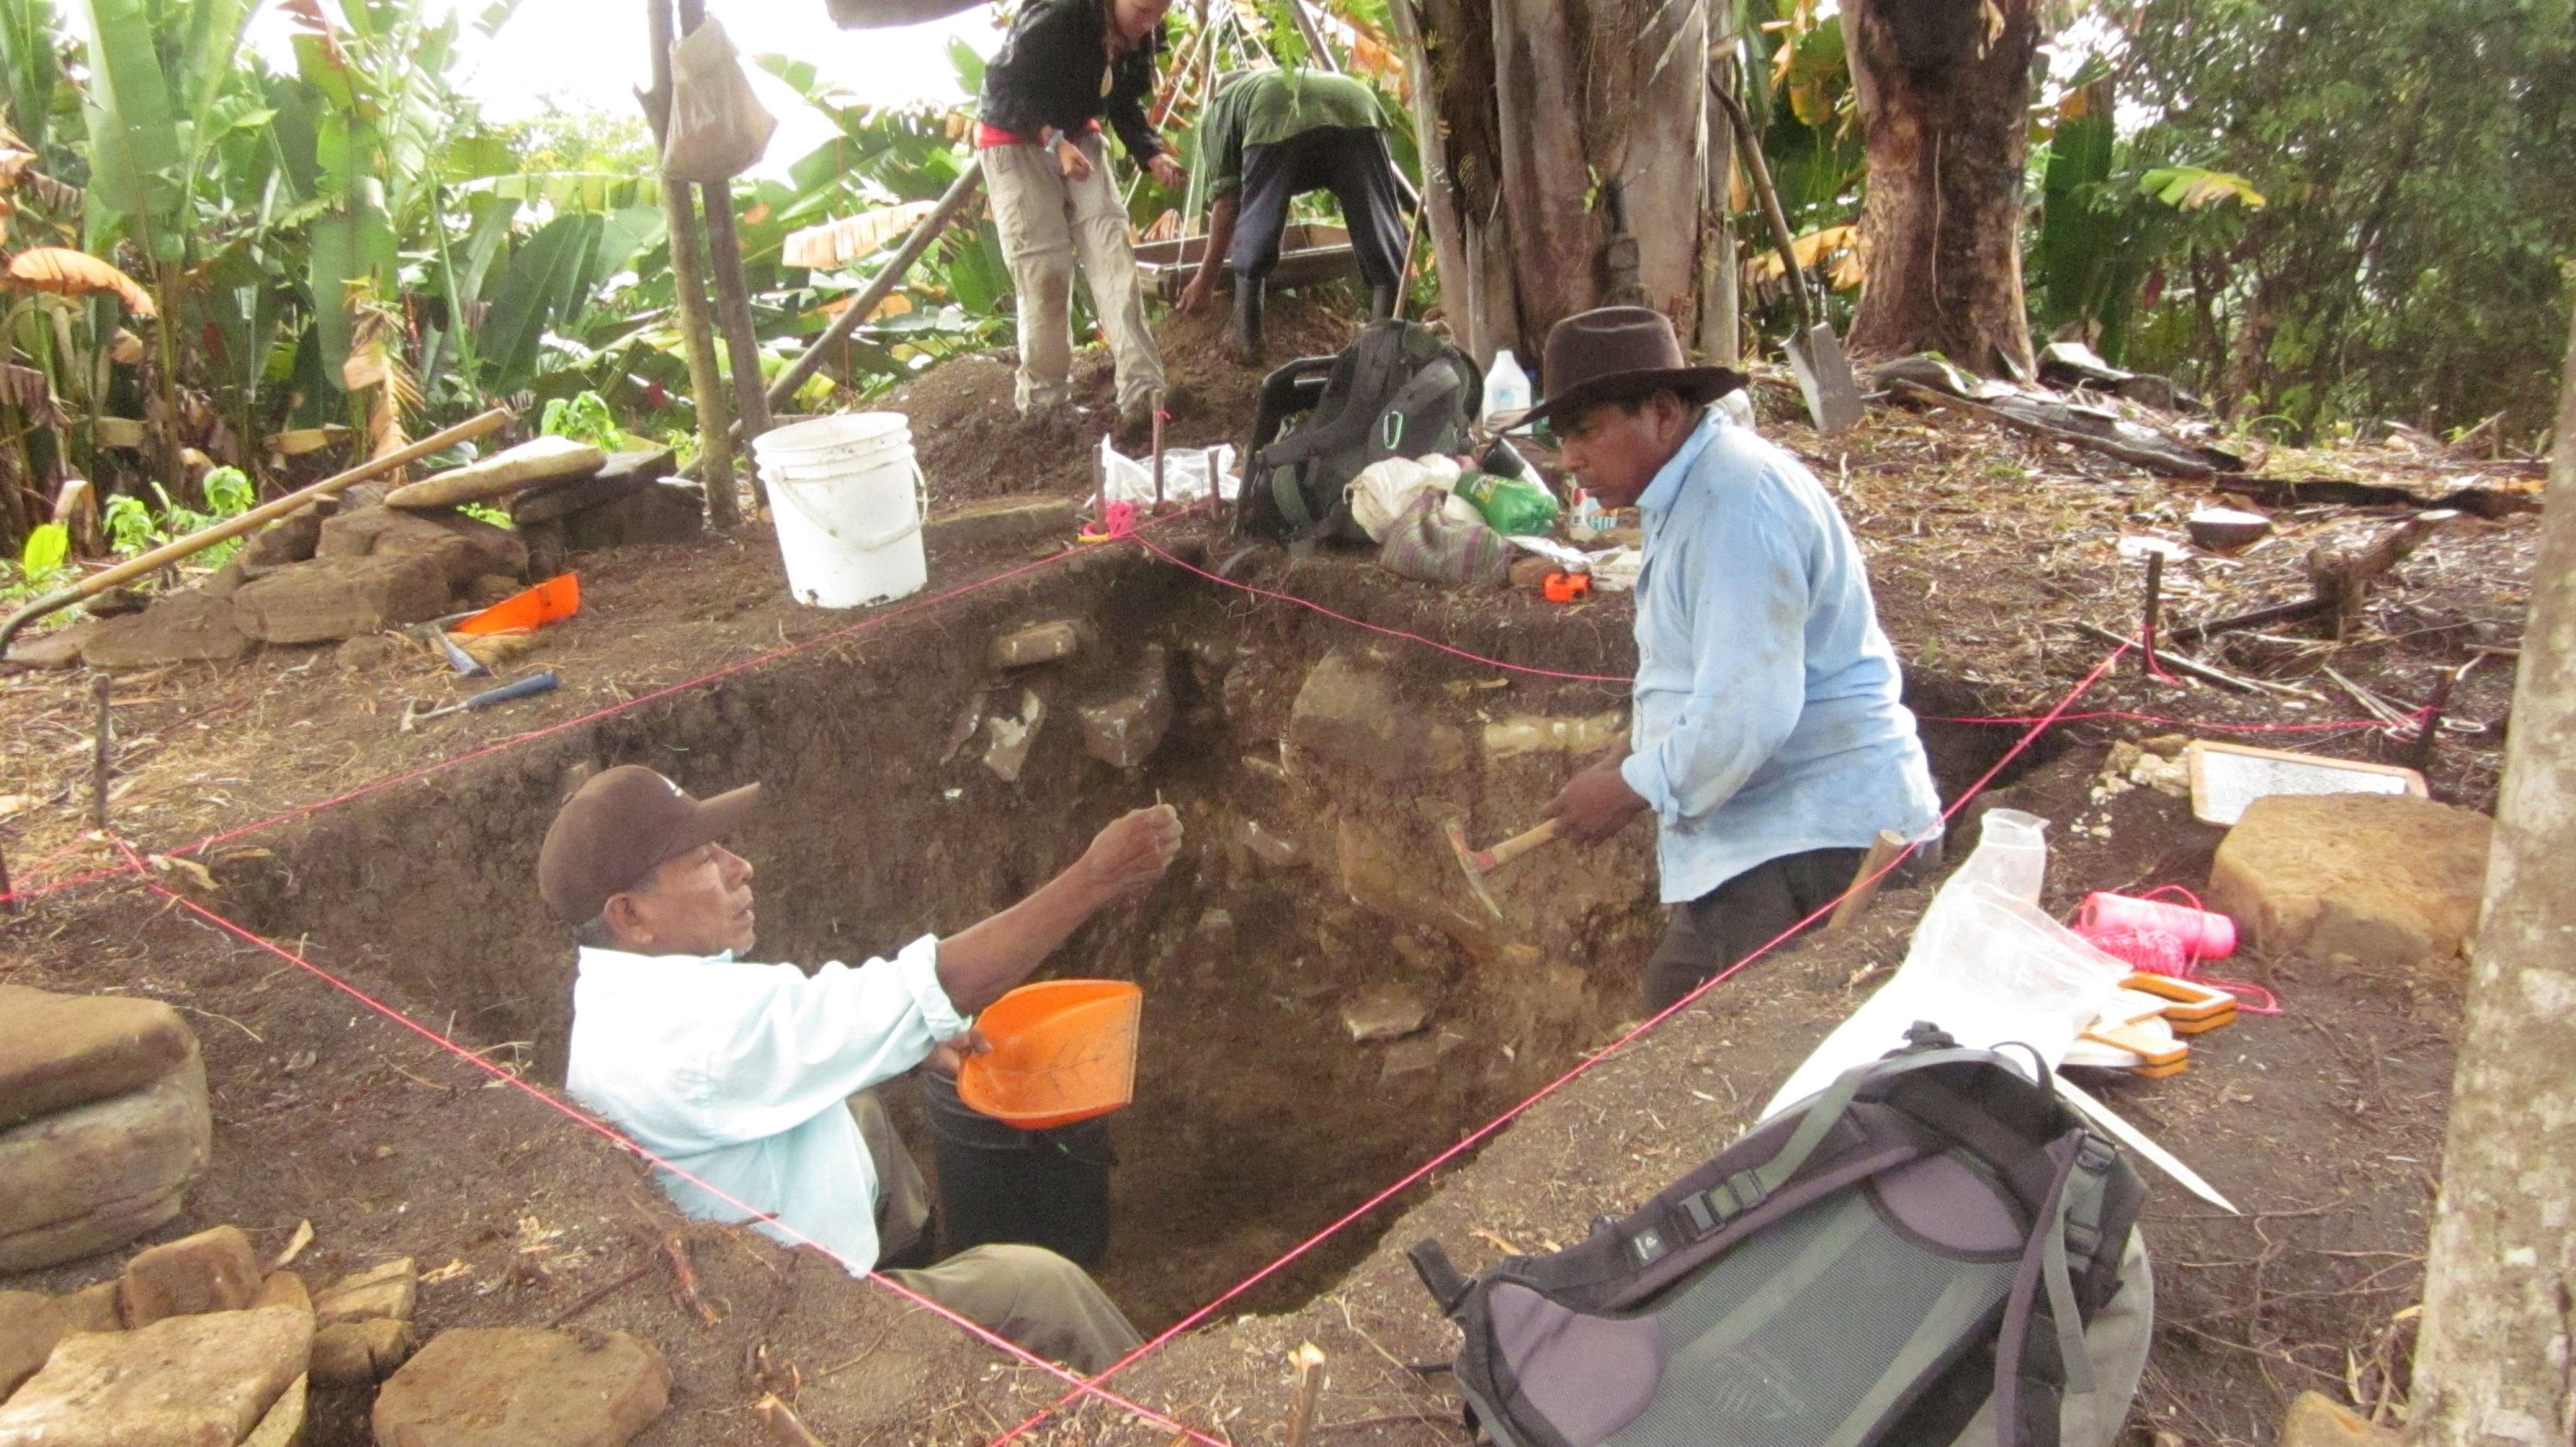 Members of the local community working with a team of archaeologists share finds during excavations at the remains of a house at the ancient Maya site of Uxbenka, Belize in April 2012. Picture taken in April 2012. (Handout via REUTERS)